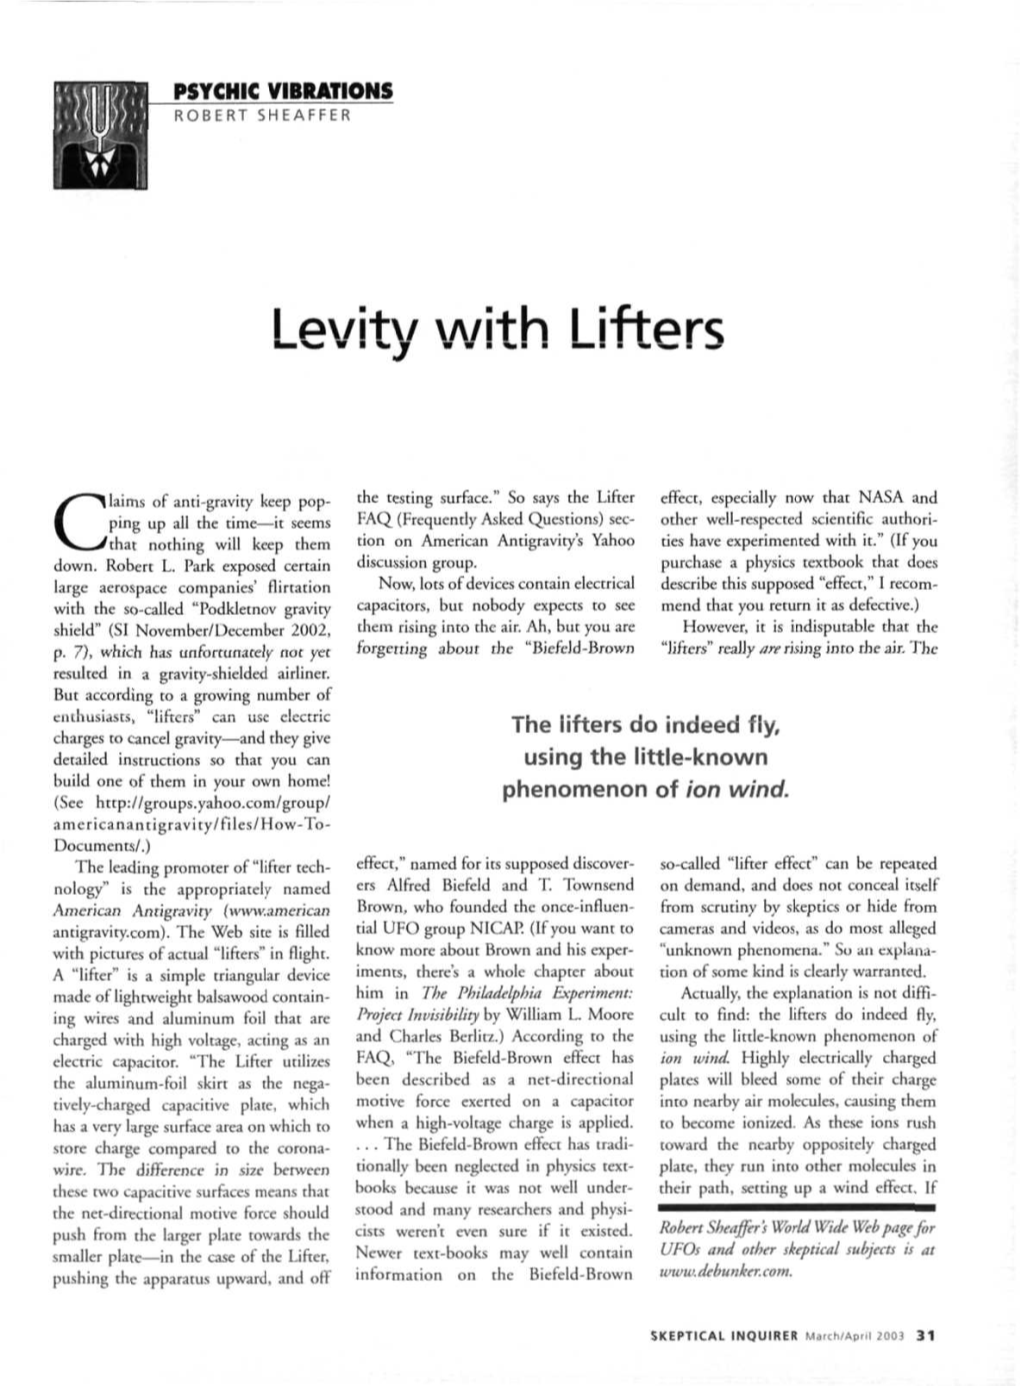 Levity with Lifters